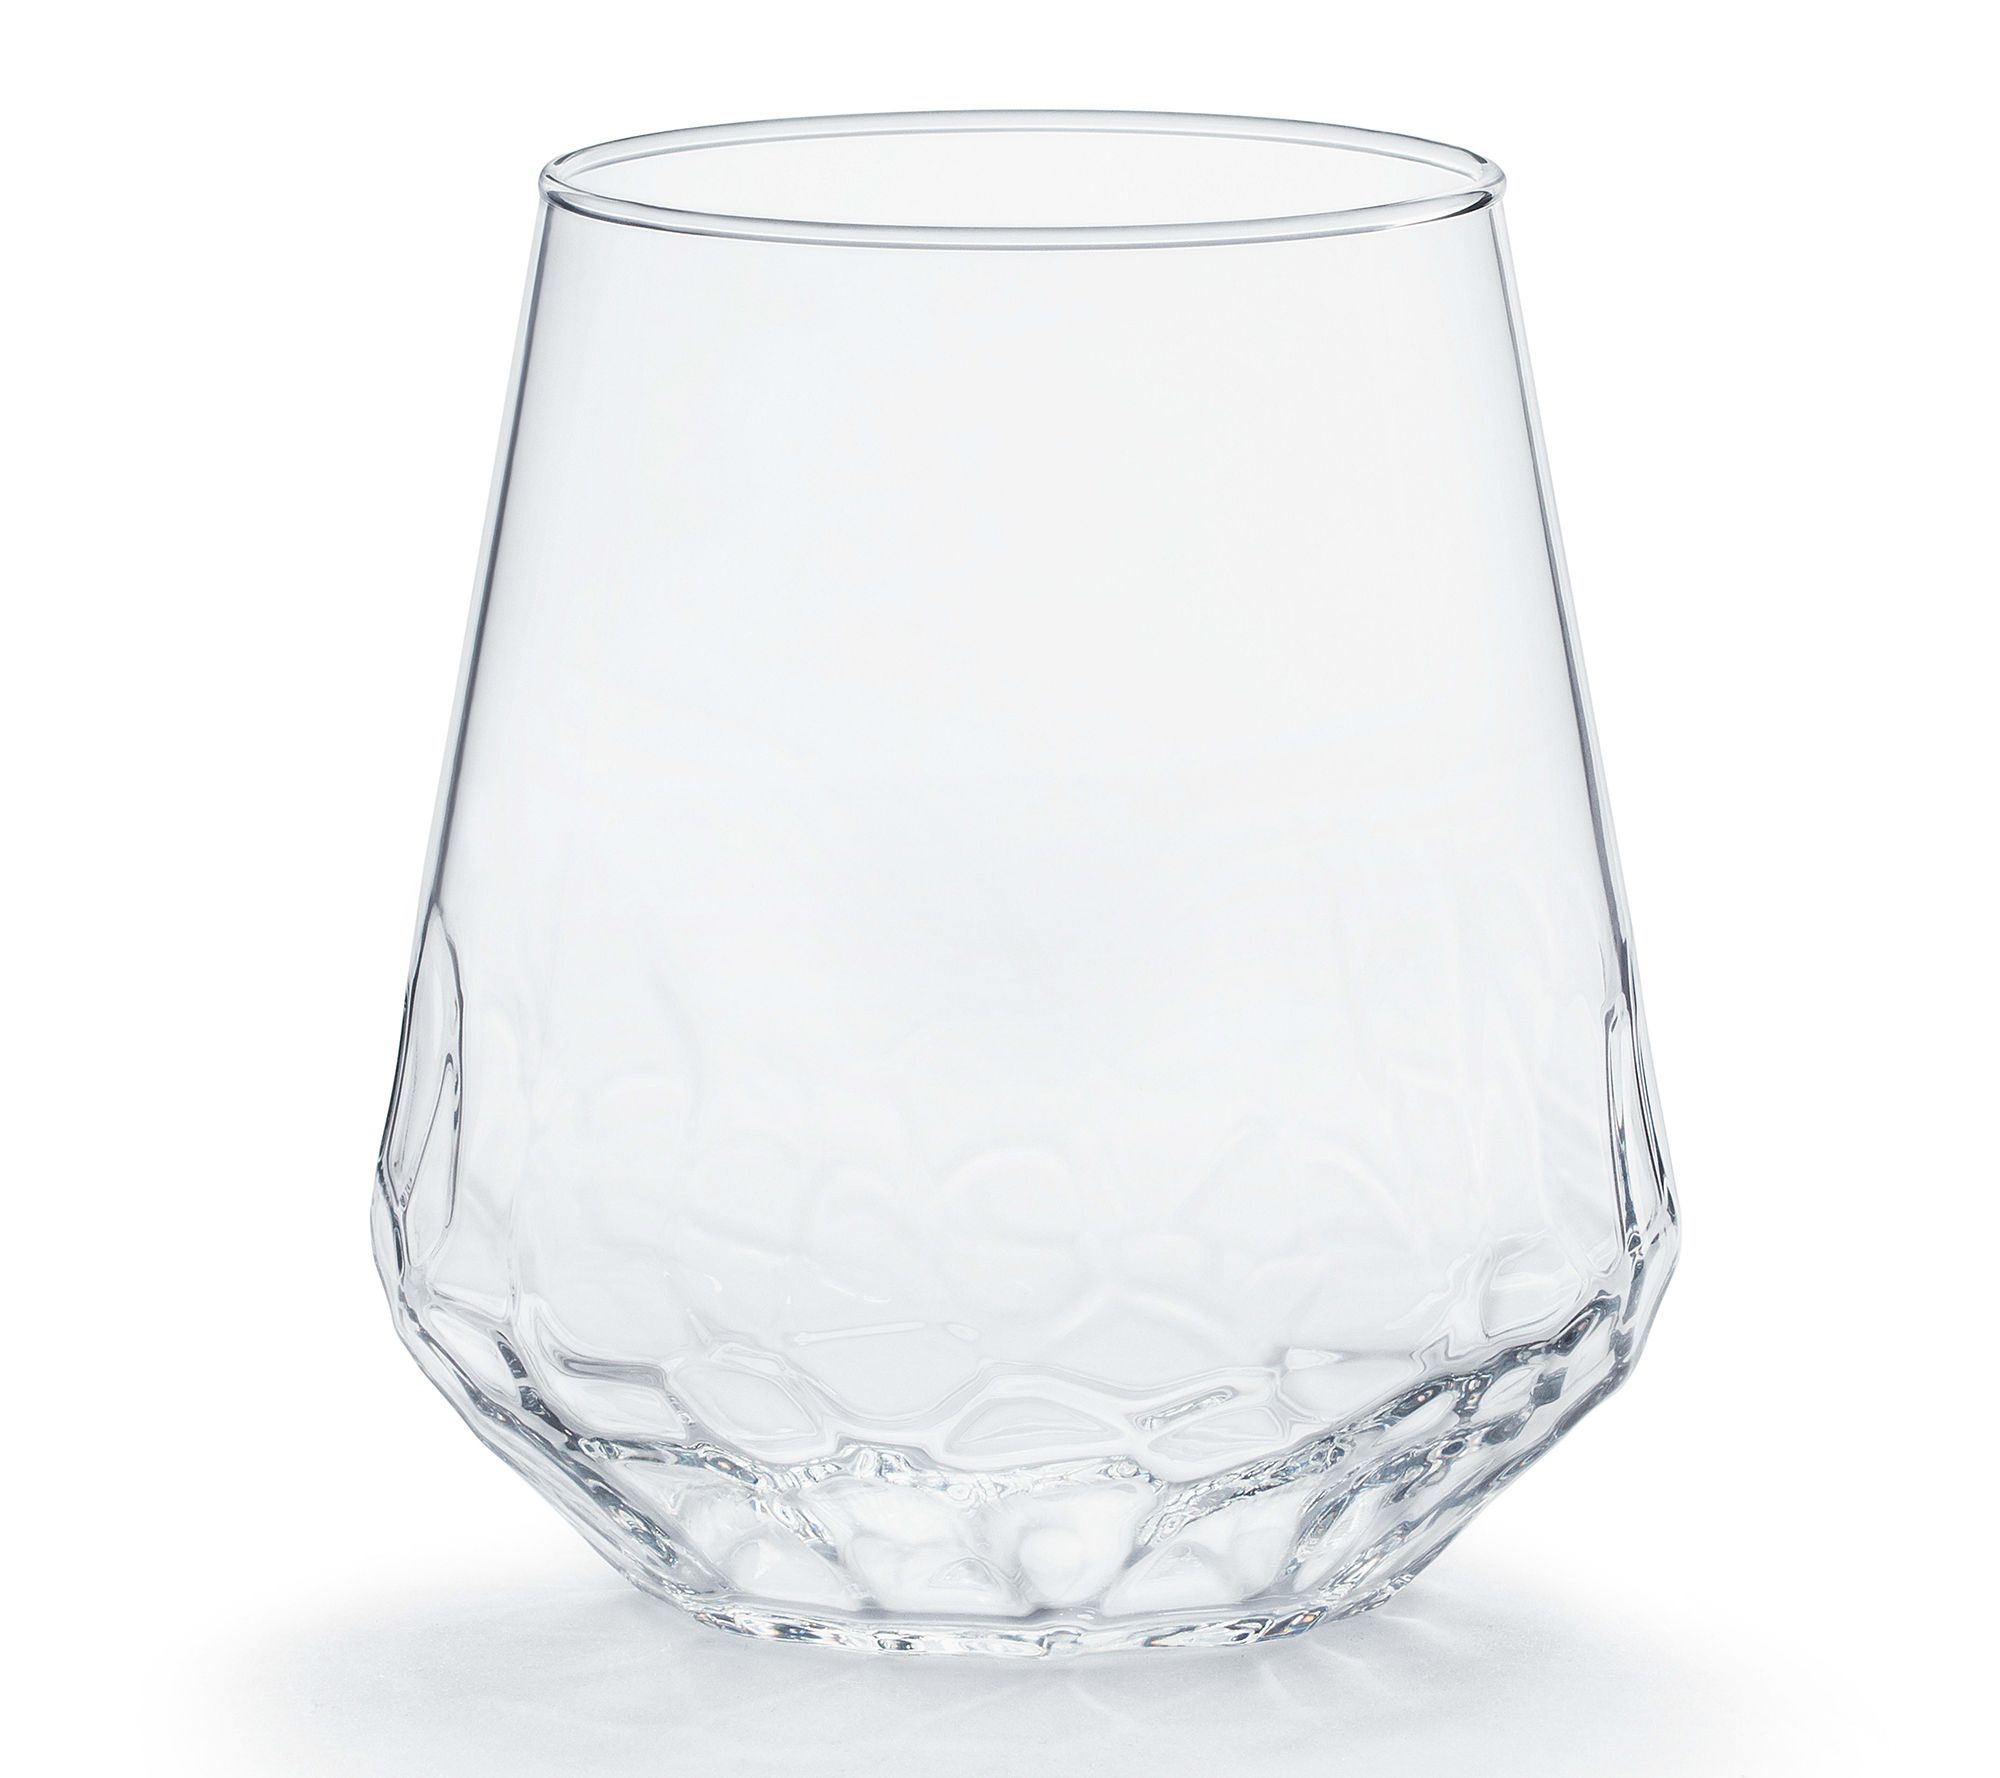 Libbey Signature Greenwich Stemless Wine Glasses, 18-Ounce